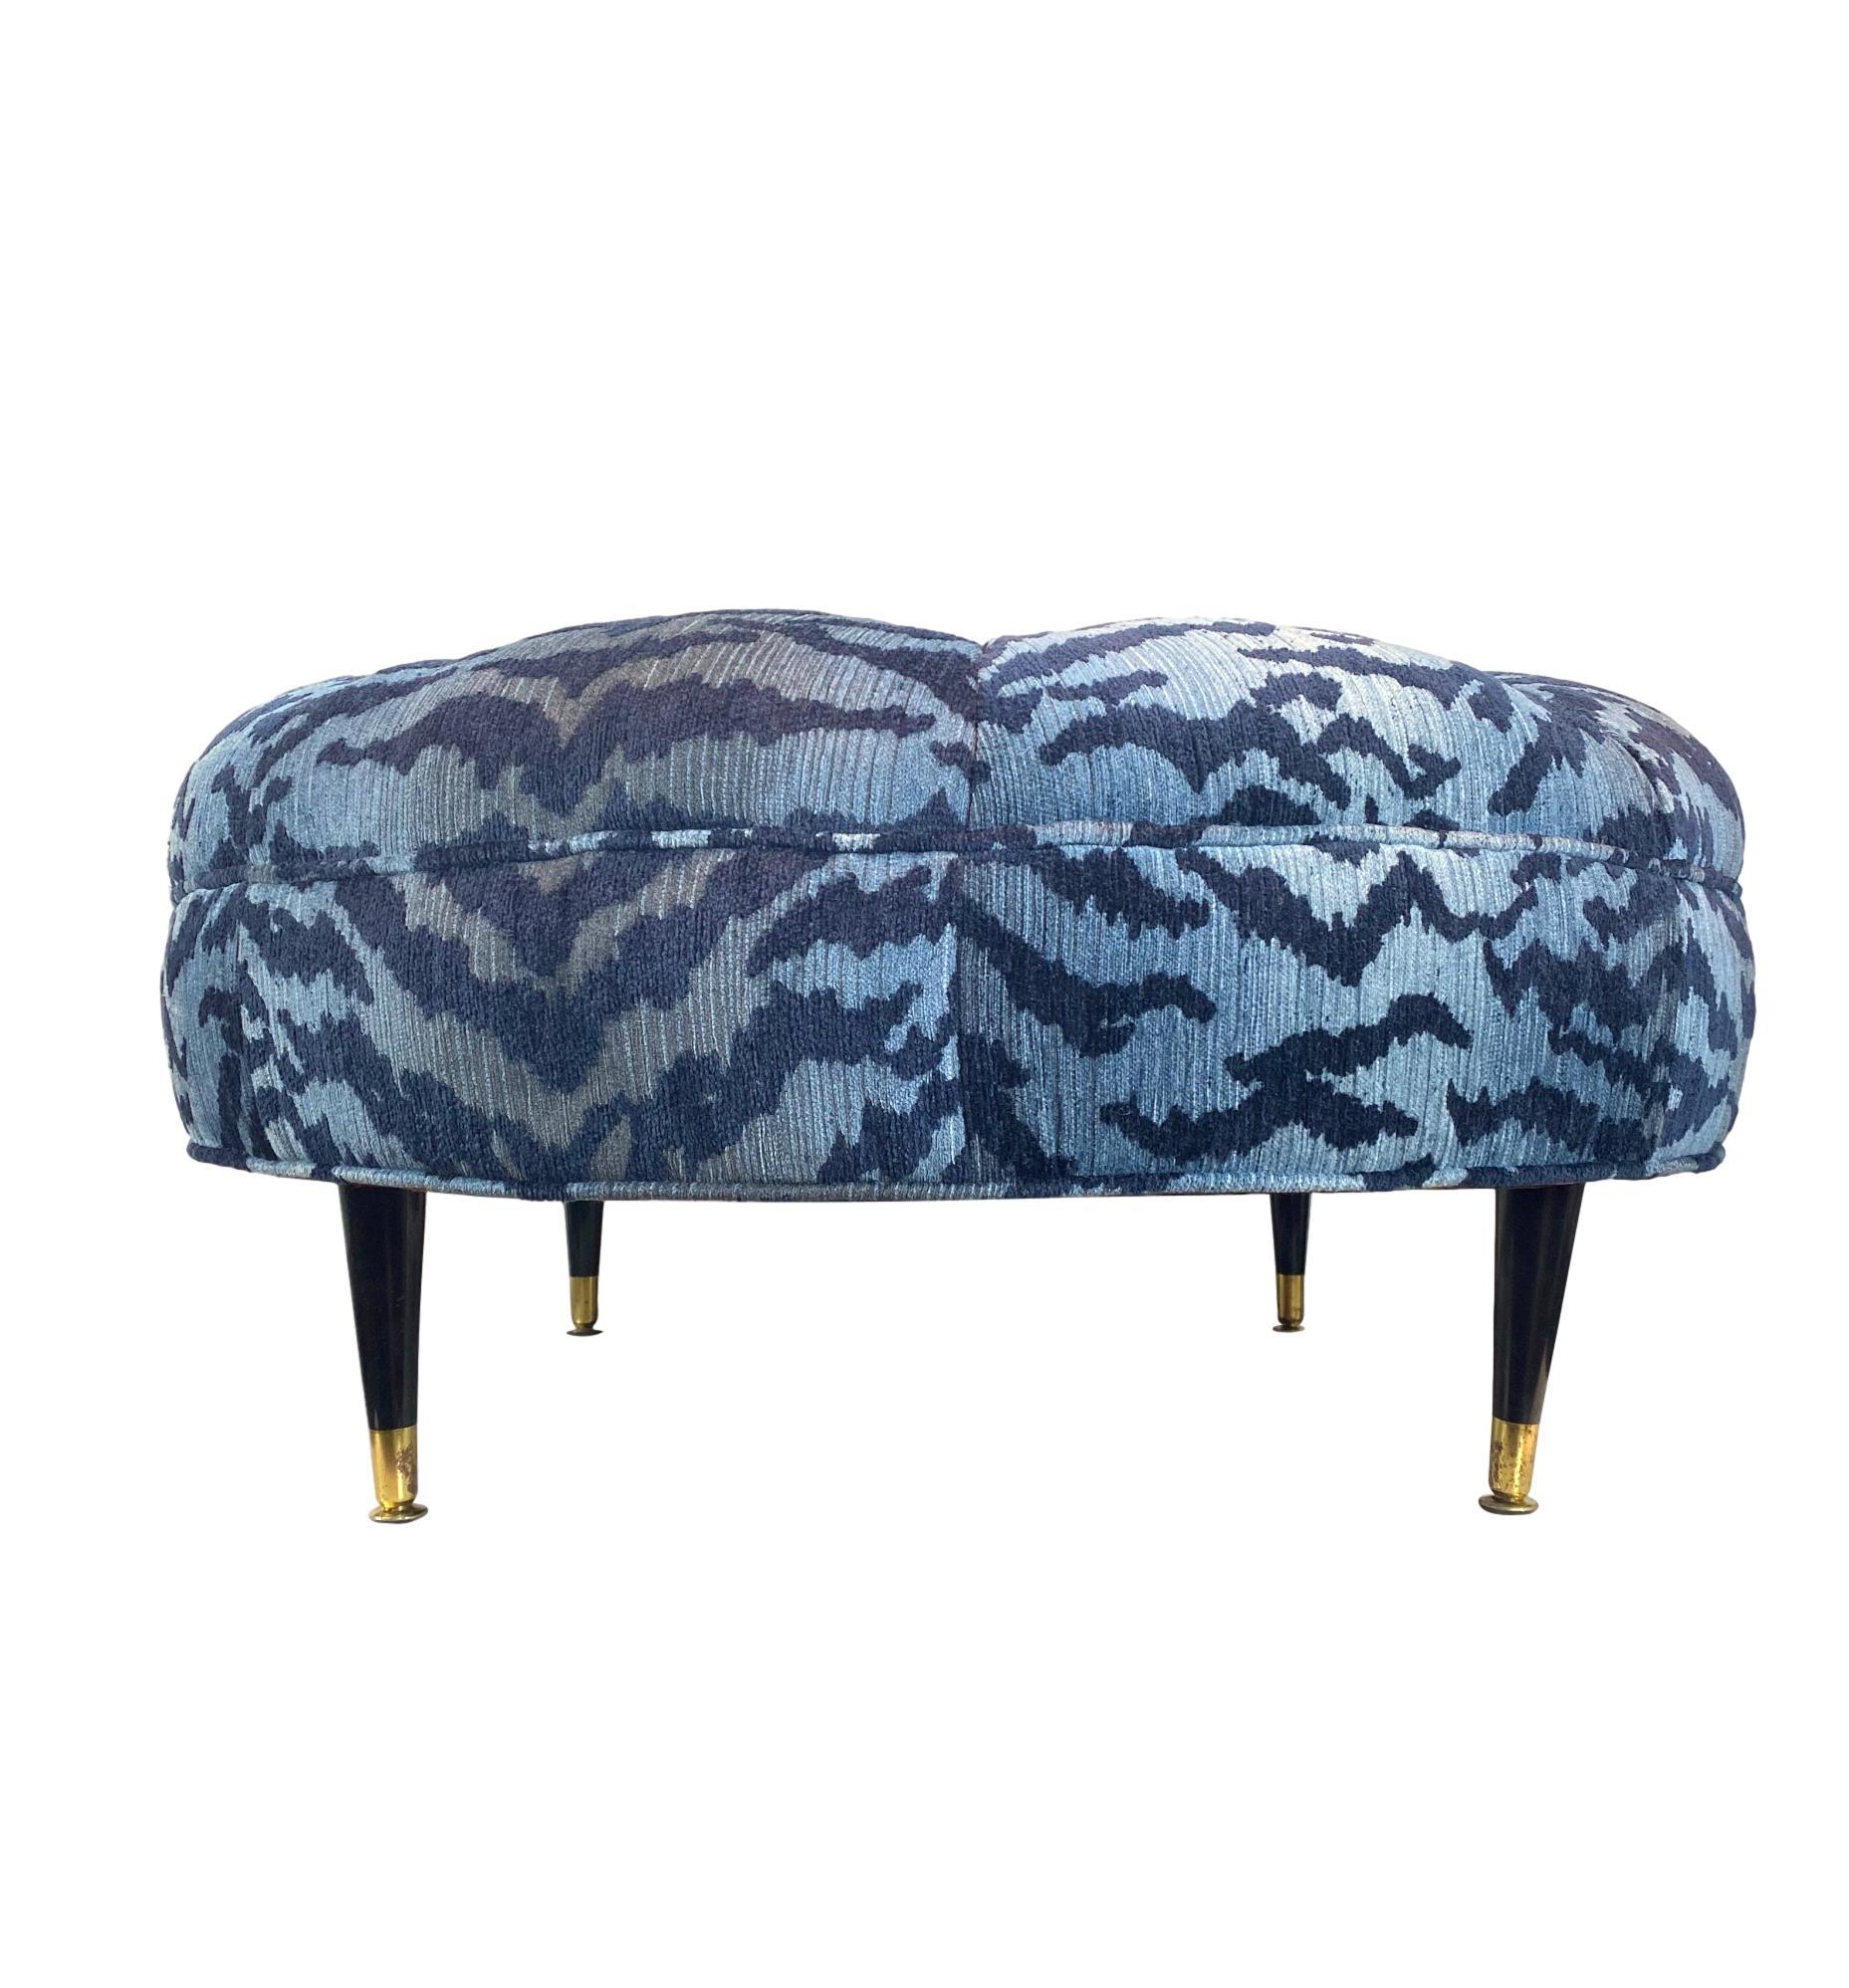 French Mid-Century Modern Ottoman, circa 1950s Newly Upholstered in Blue Tiger Velvet